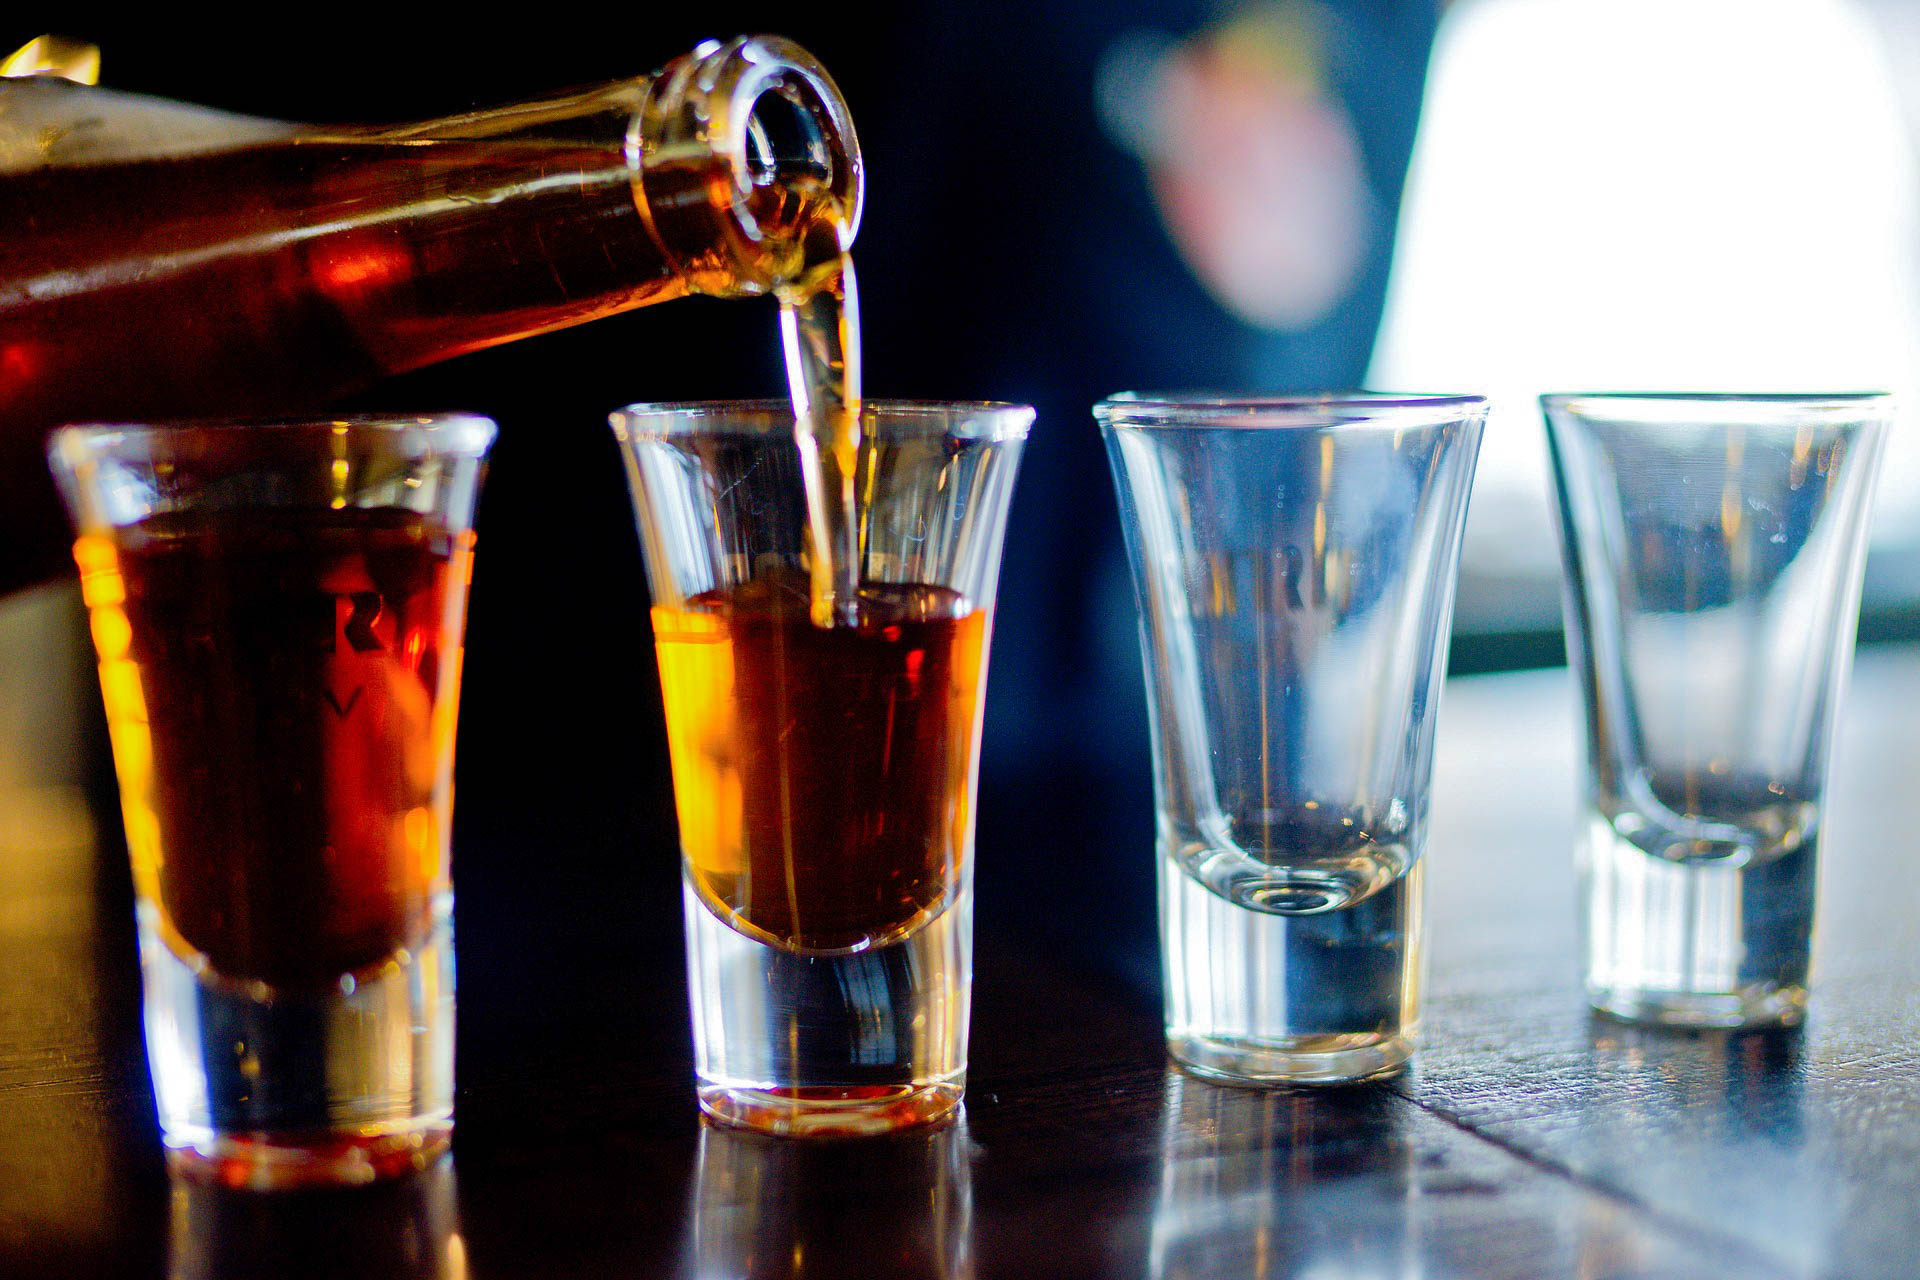 OPINION: Drinking age should be lowered to 18